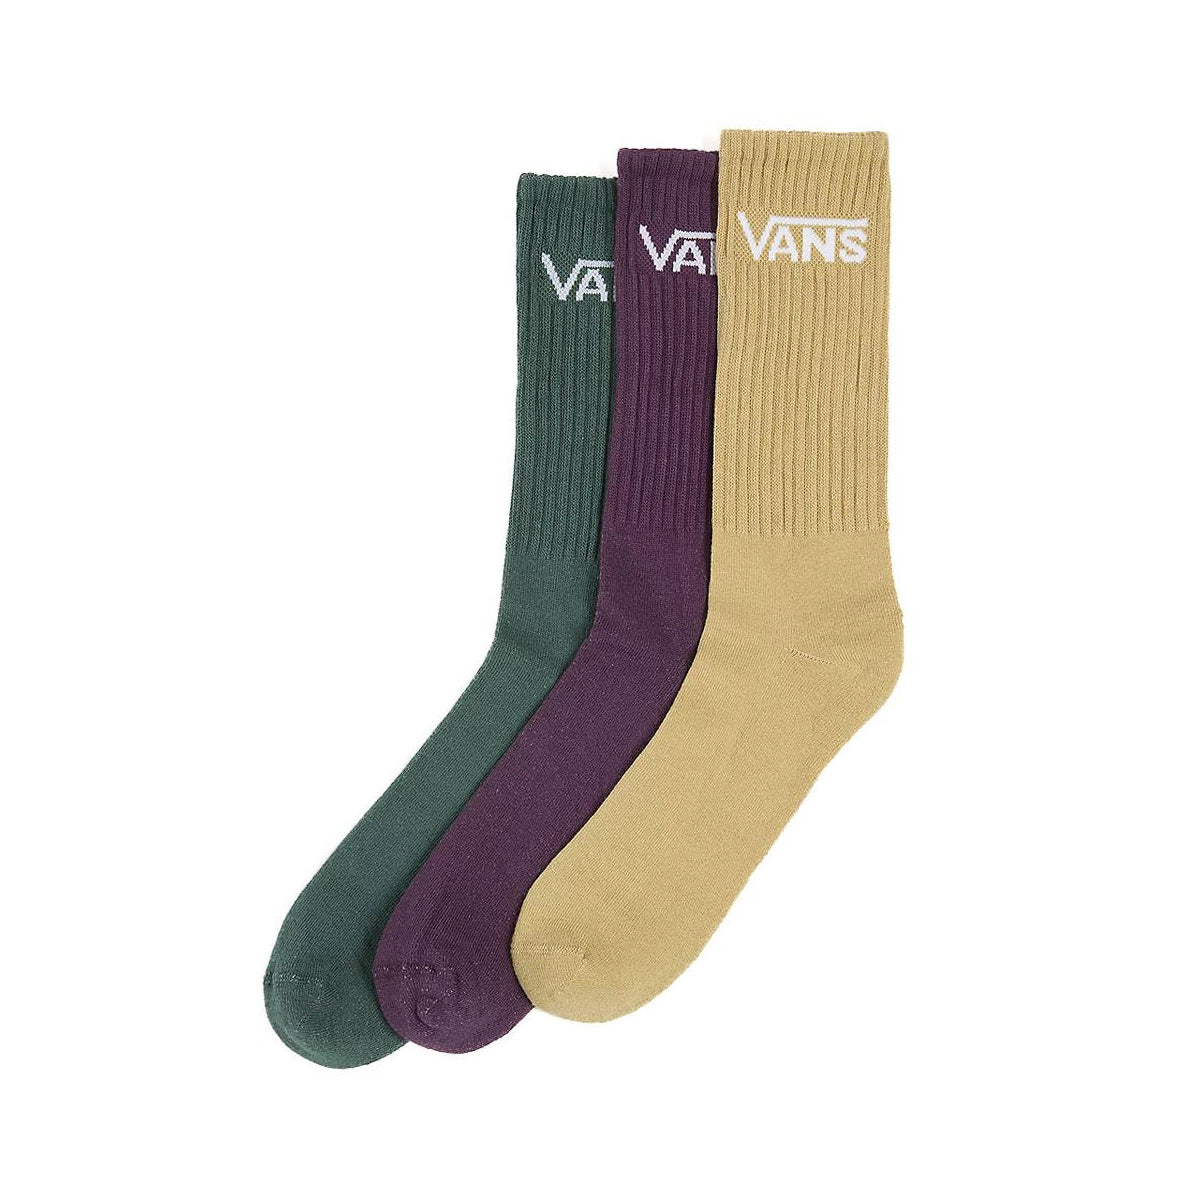 Three pack vans crew socks in green, burgundy and cream with white vans logo. Free uk shipping over £50